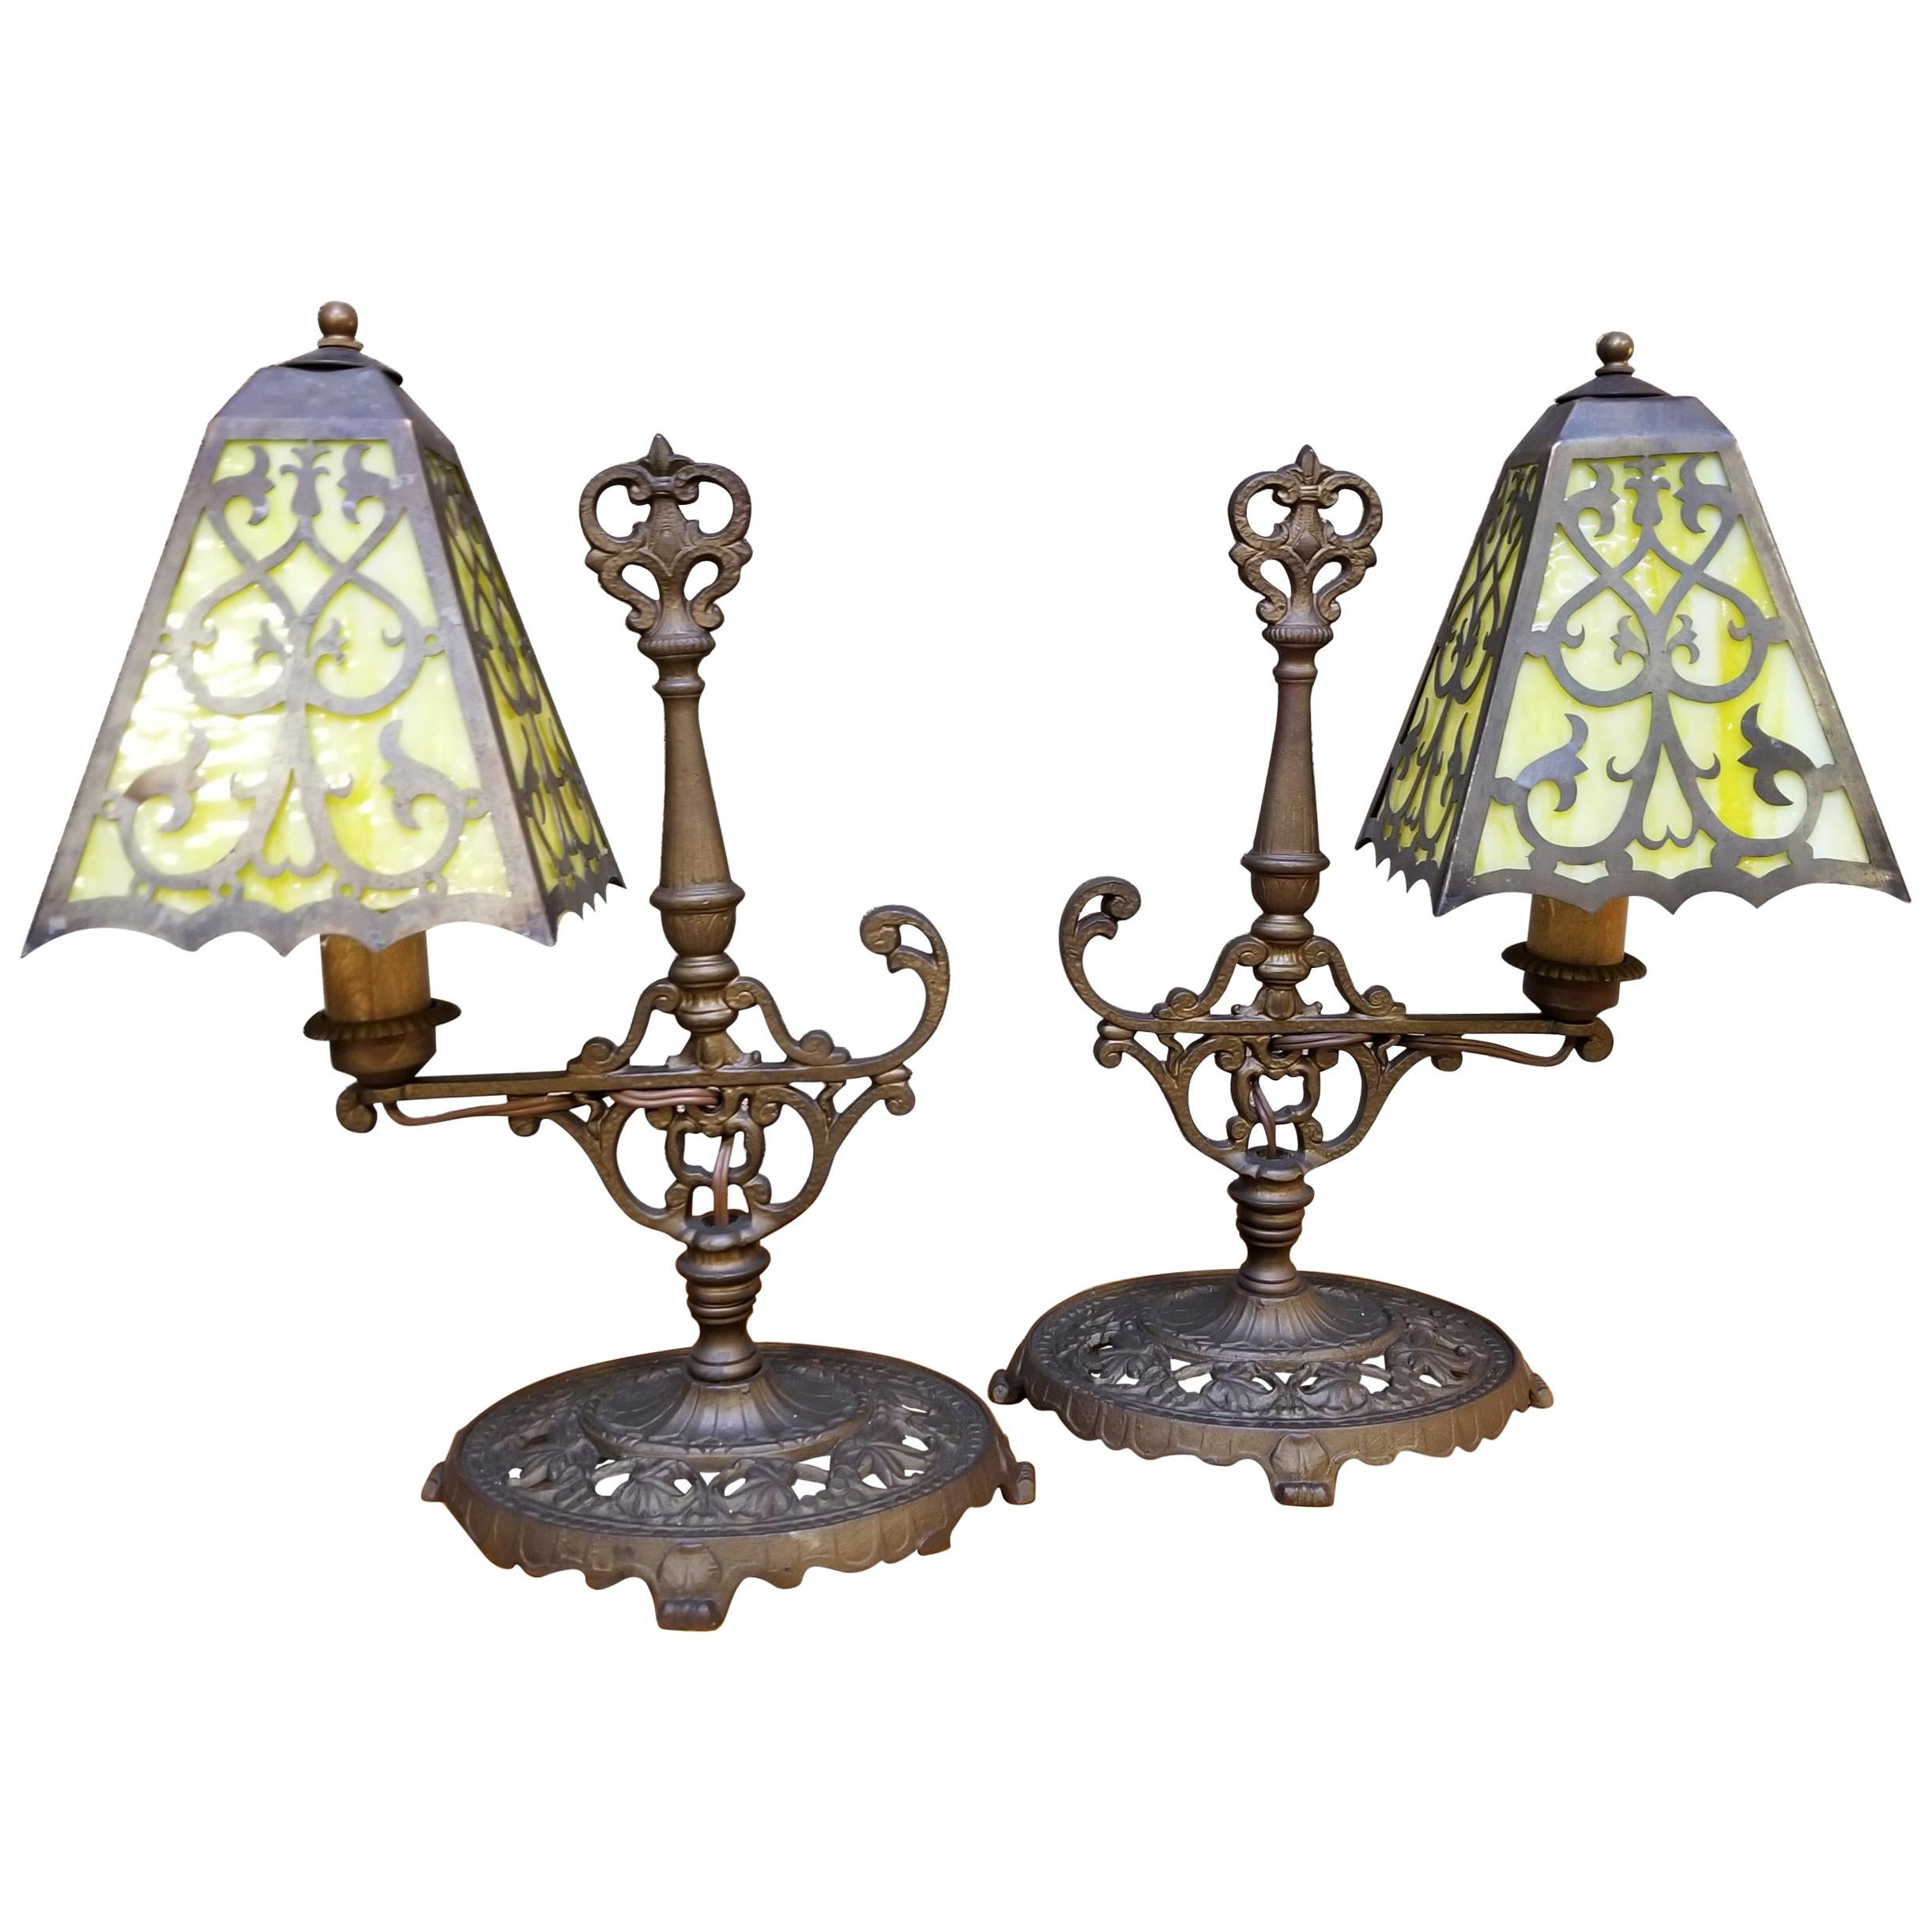 Spanish Revival Cast Iron Table Lamps